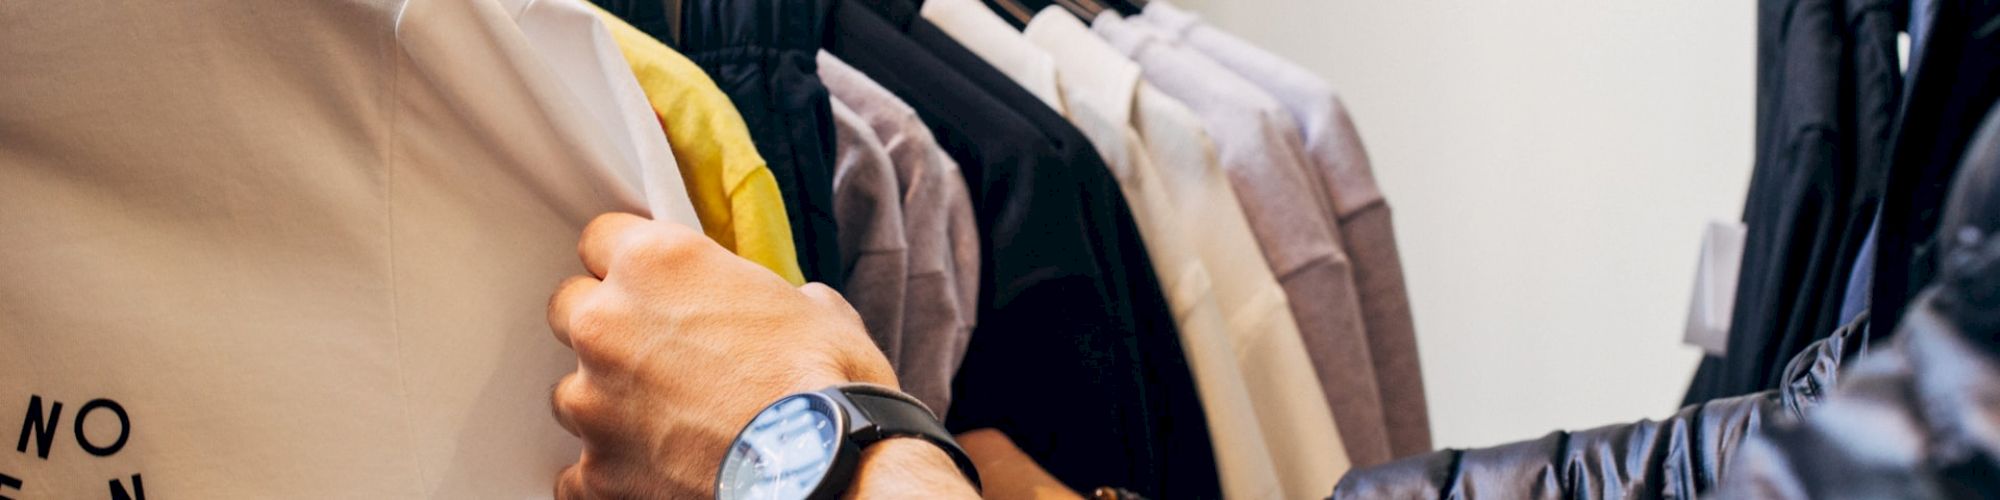 A person wearing a wristwatch is shopping for clothes, with their hands sifting through various colored shirts on a clothing rack.